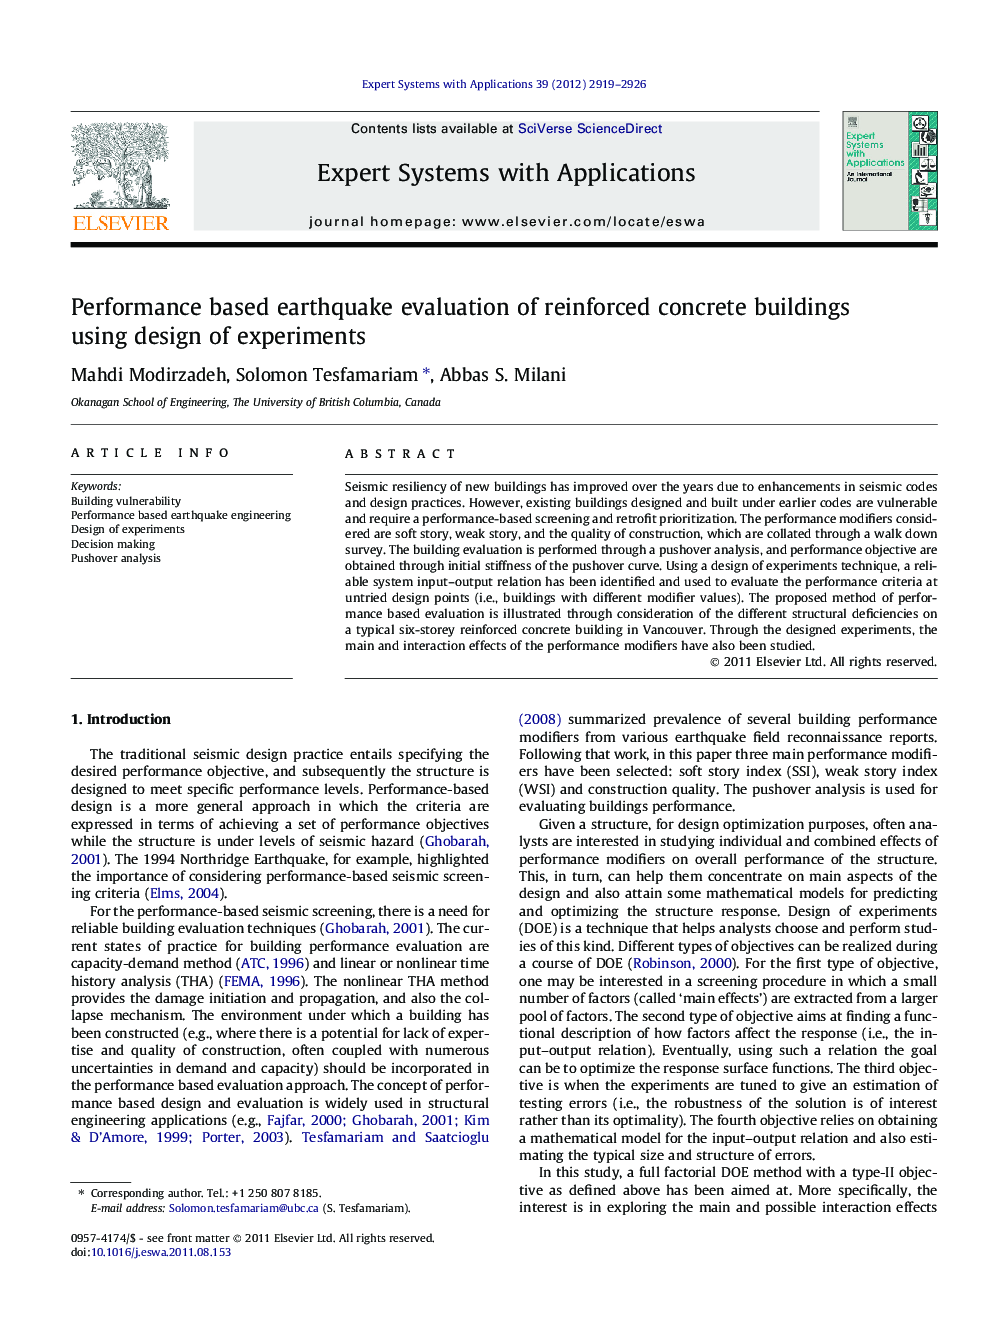 Performance based earthquake evaluation of reinforced concrete buildings using design of experiments